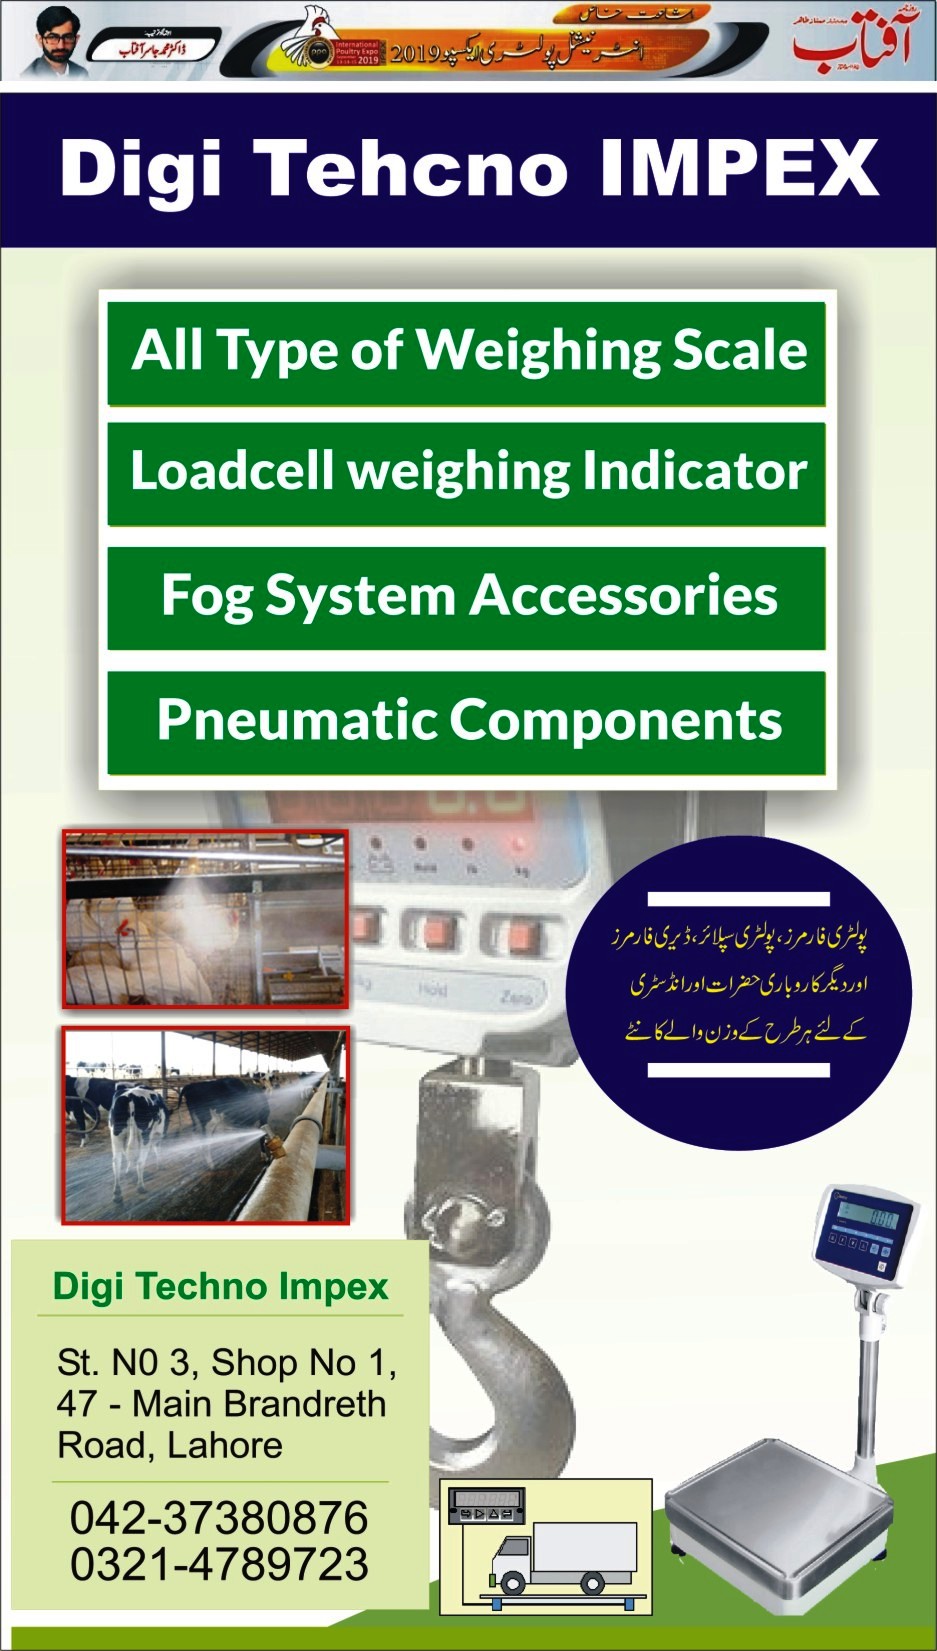 Digi Techno IMPEX weighing balance and fogging system 